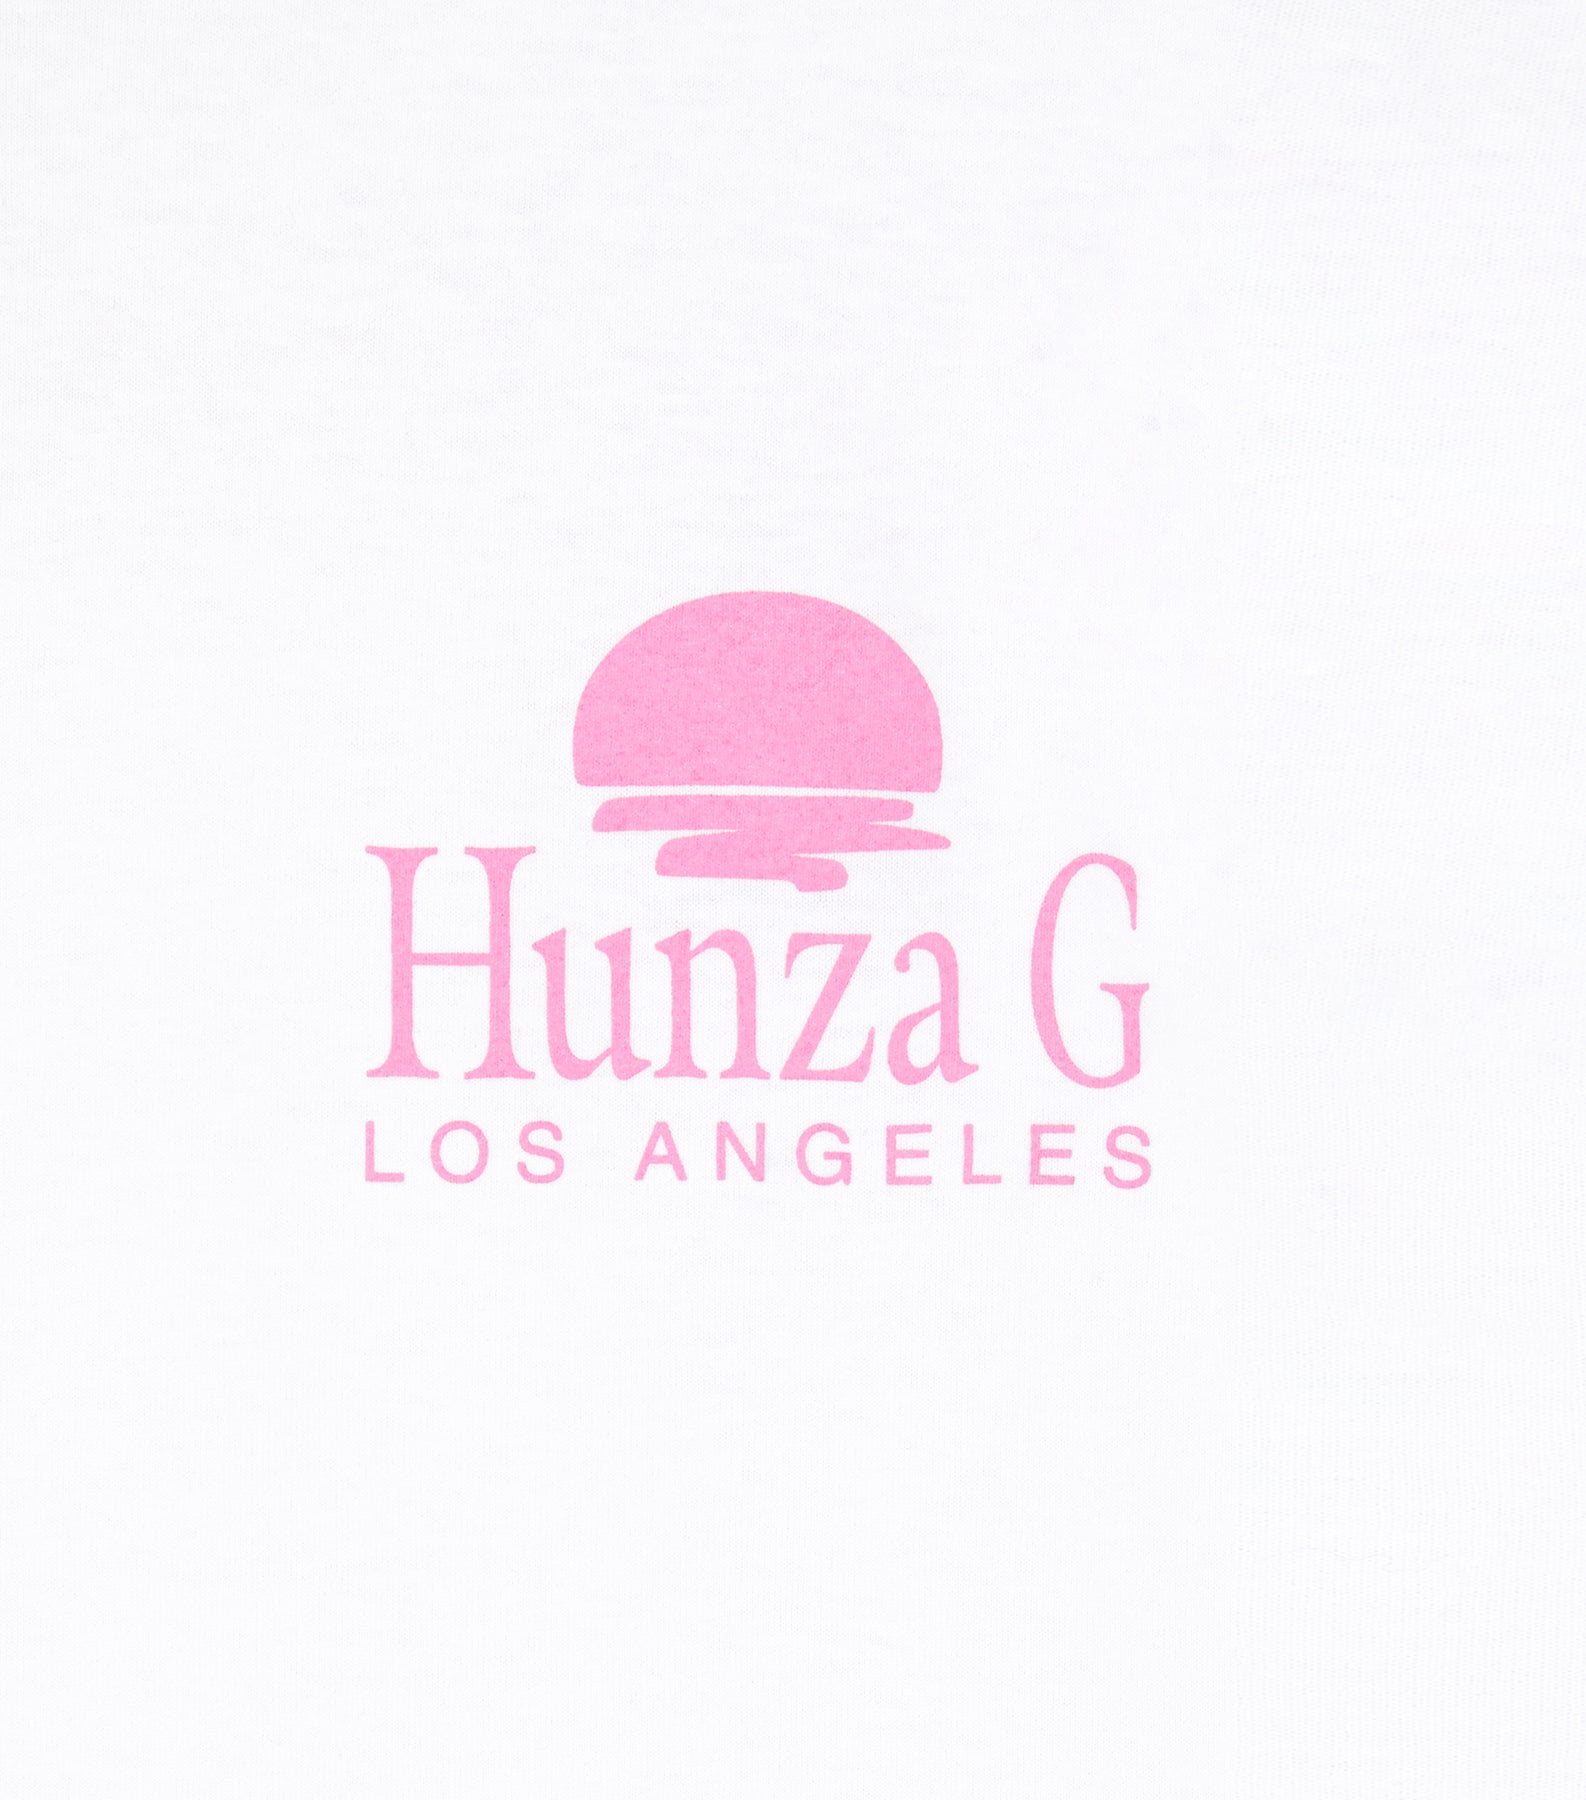 Test Los Angeles T shirt - White one variant